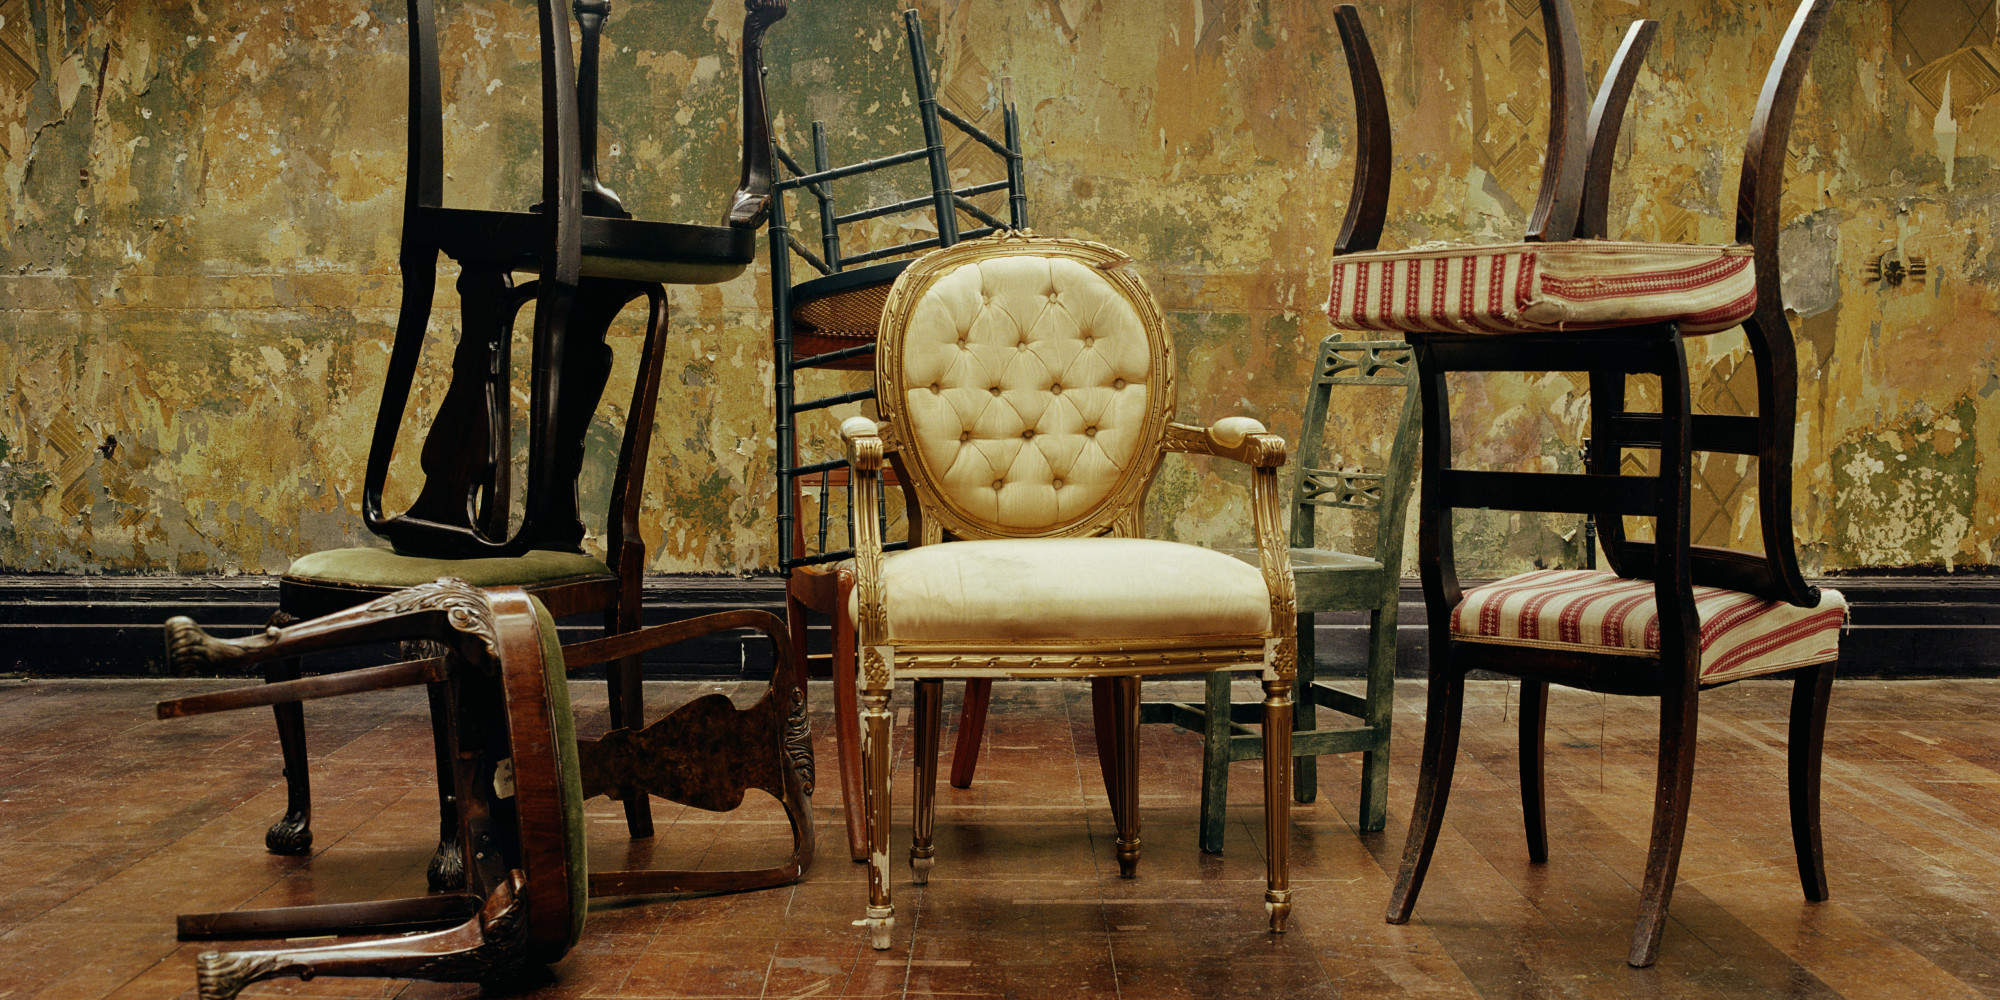 Make your own style statement with vintage furniture